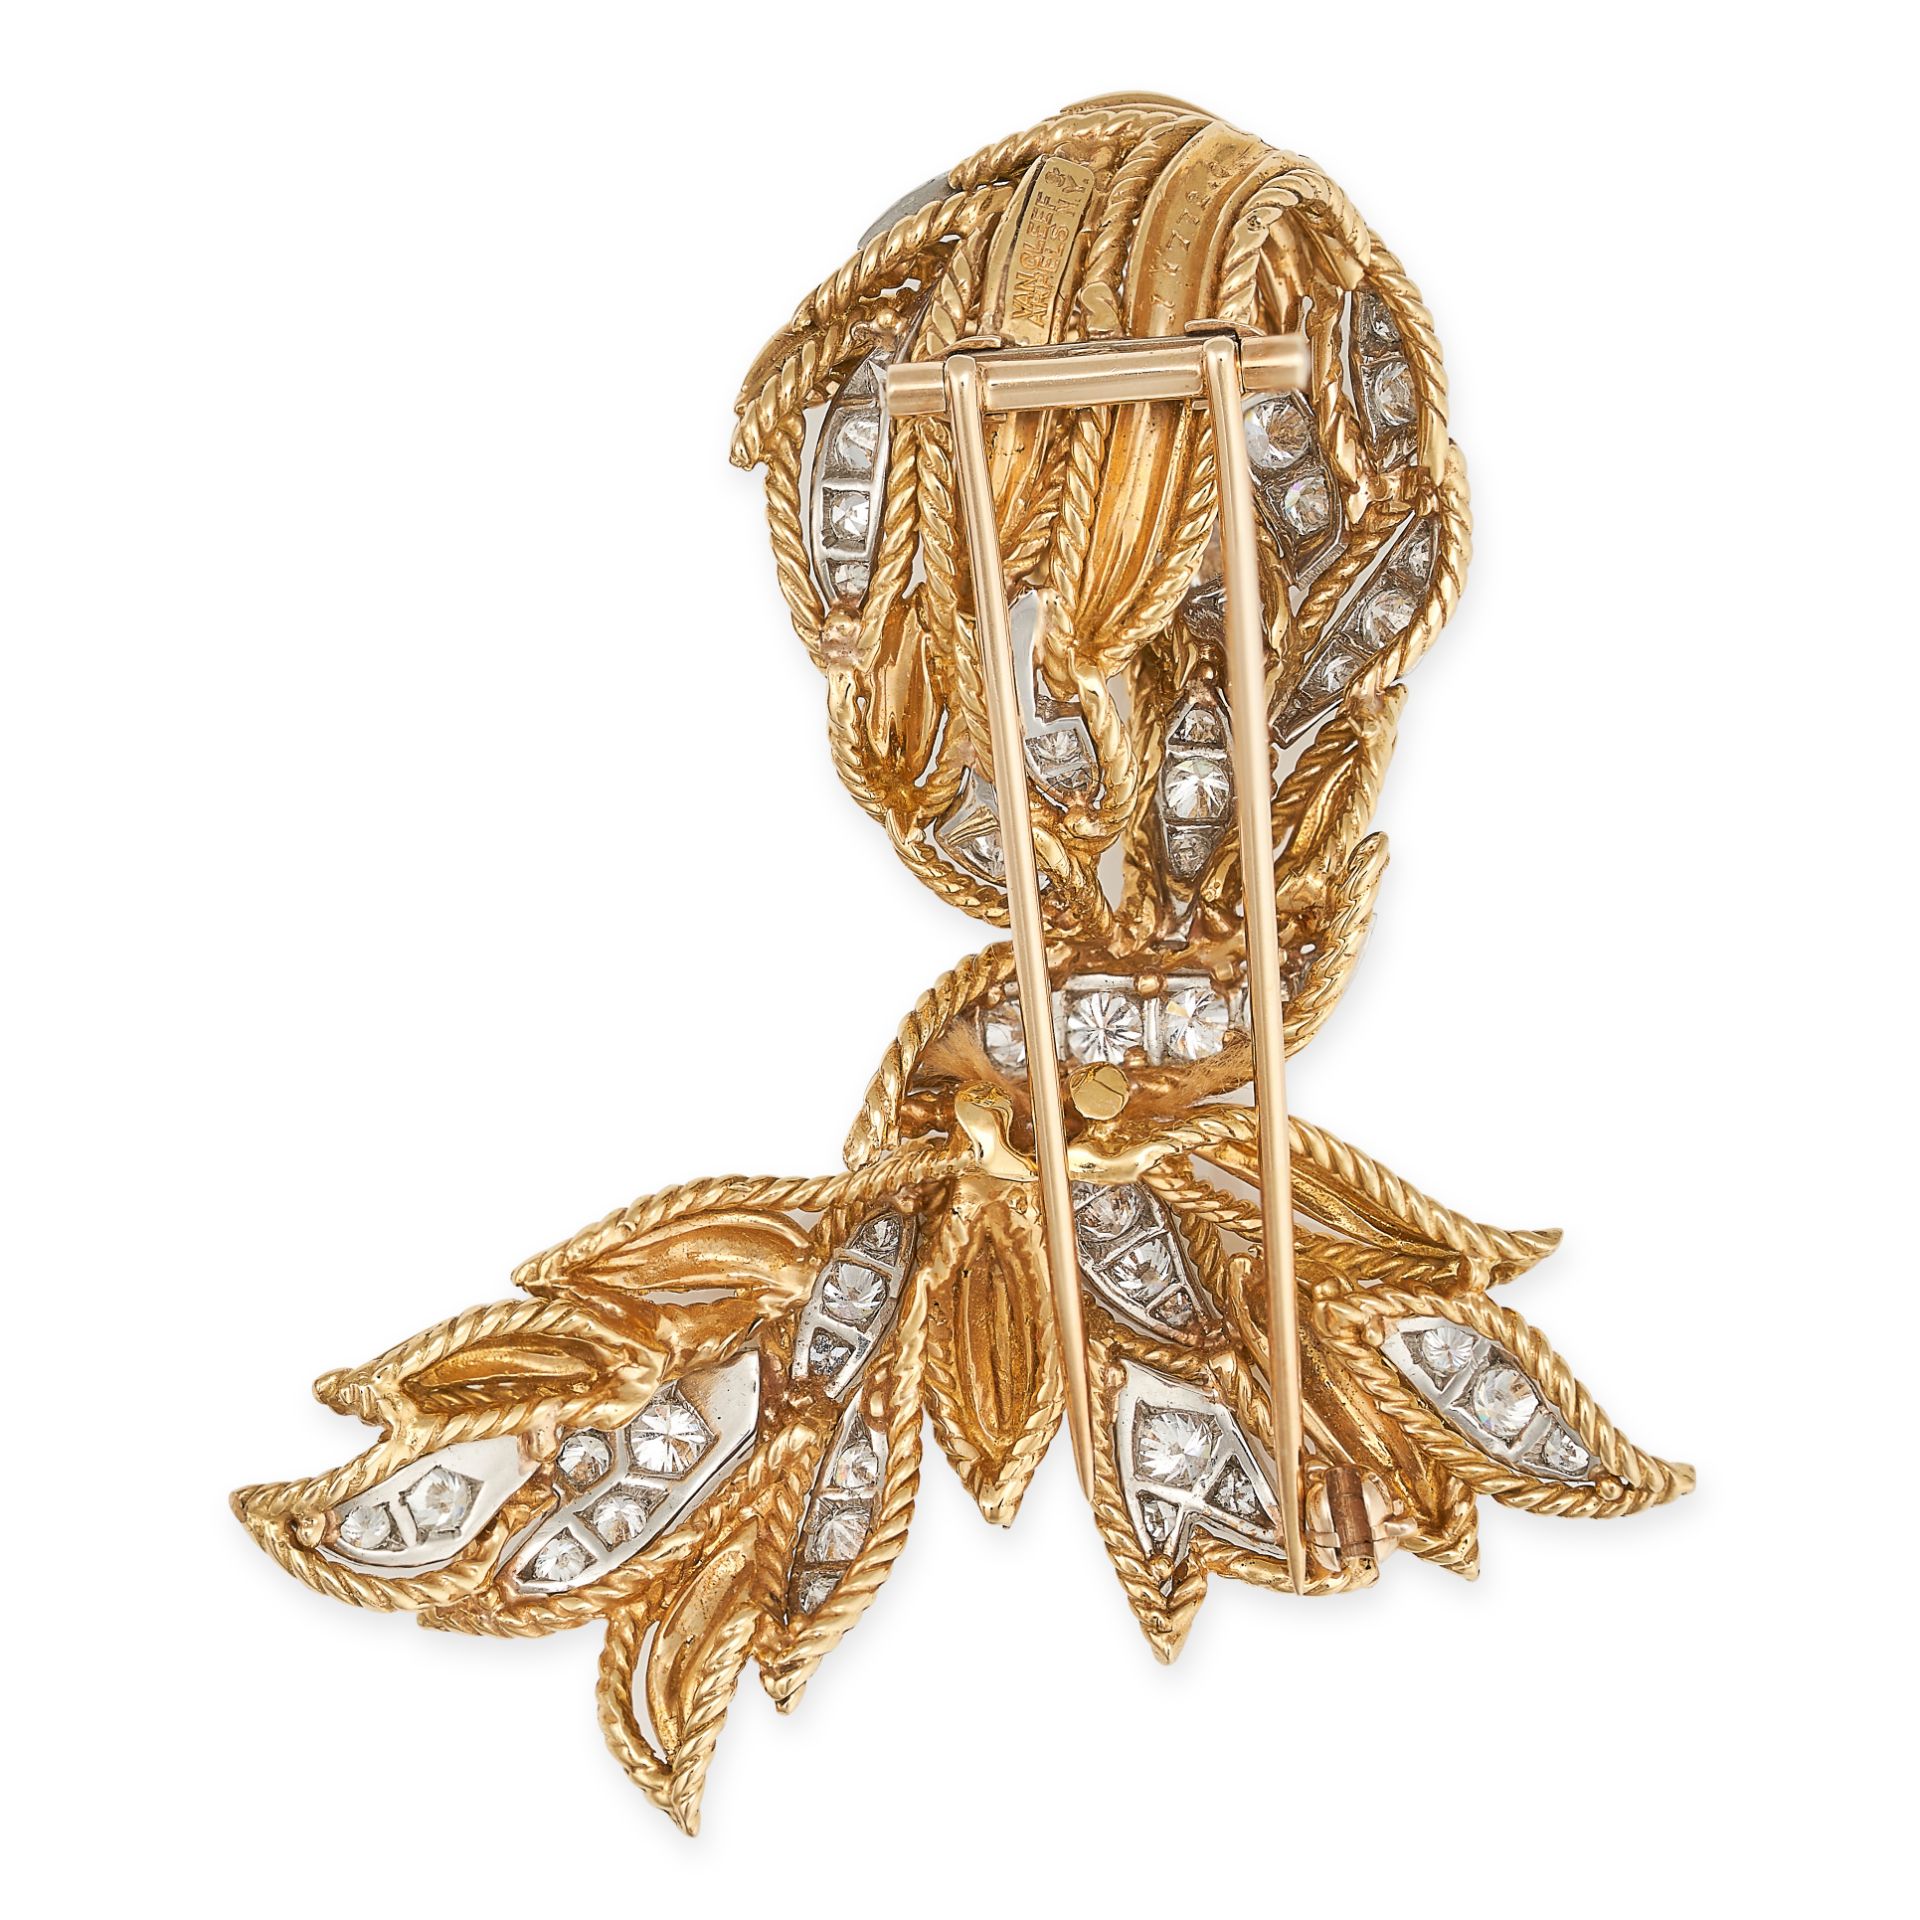 VAN CLEEF & ARPELS, A VINTAGE DIAMOND BROOCH in 18ct yellow gold and platinum, designed as - Image 2 of 2